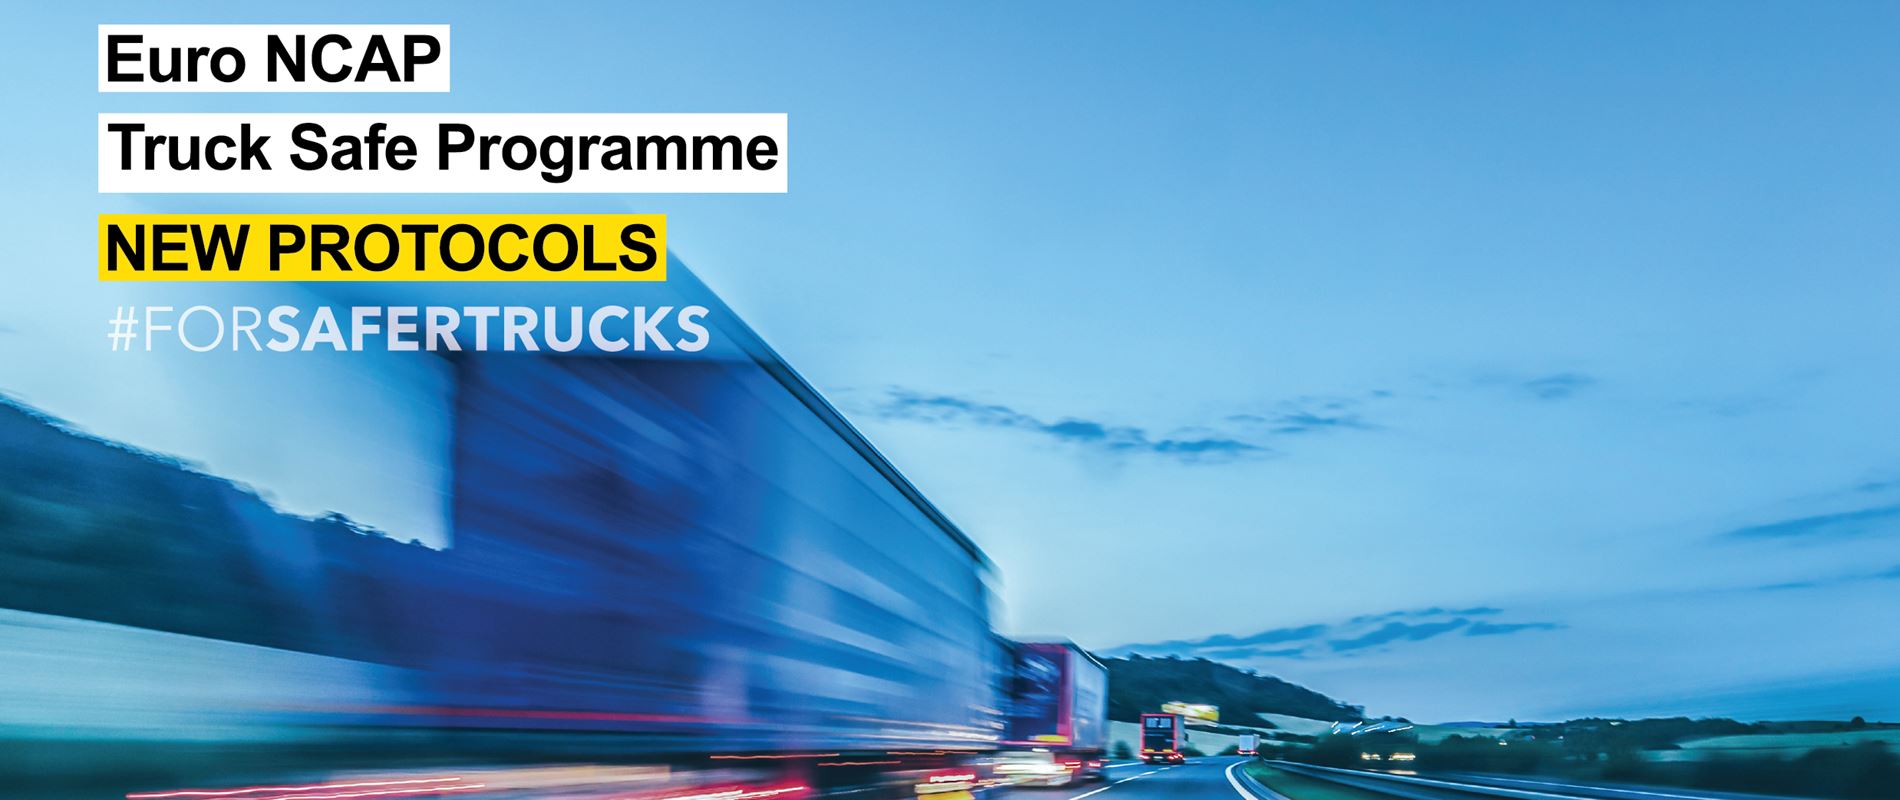 Today the first test protocols are made available for the Truck Safe Programme